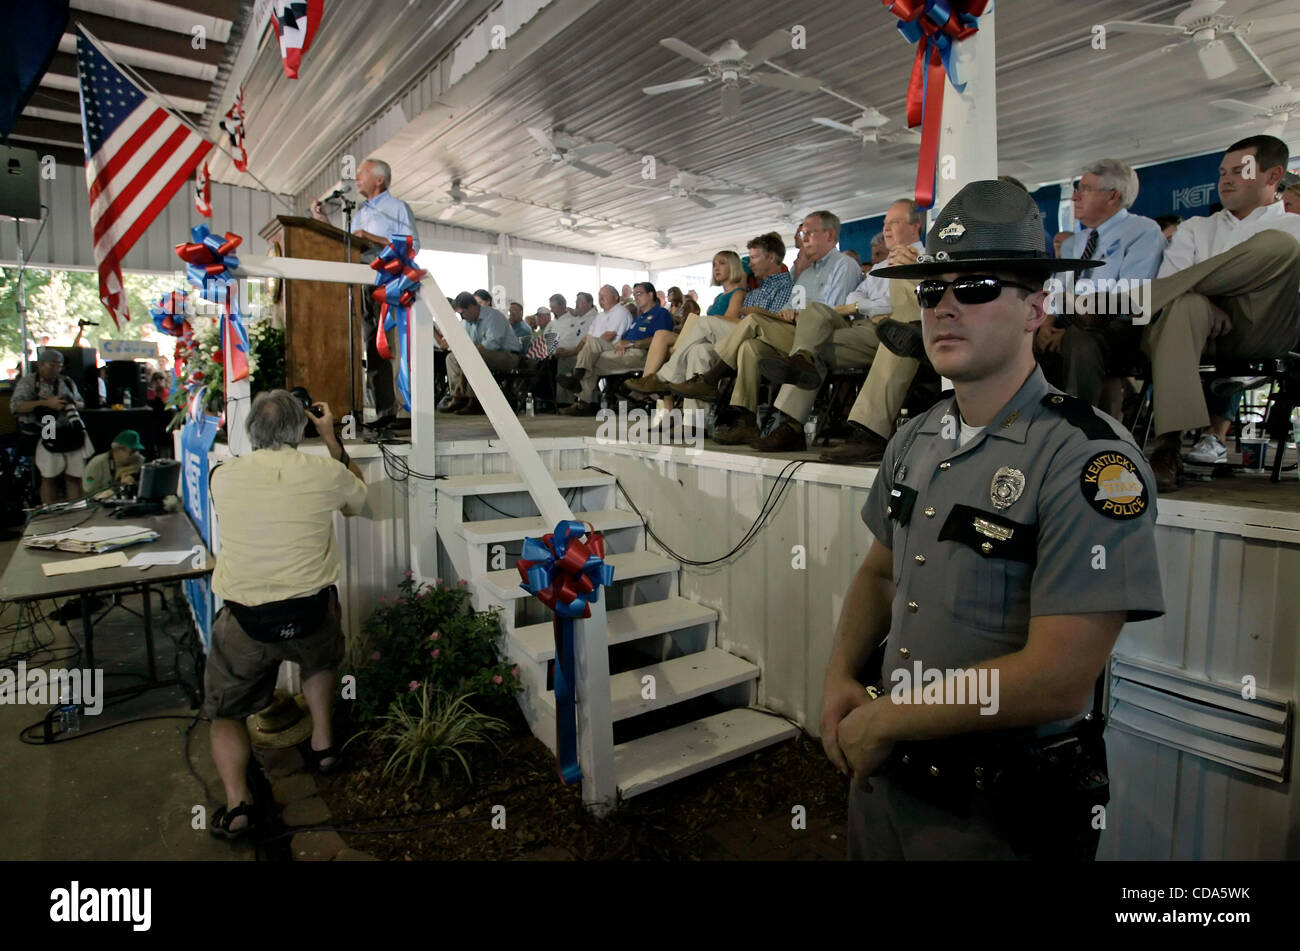 Aug 07, 2010 - Fancy Farm, Kentucky, U.S. - A Kentucky State Police trooper keeps watch as Democratic Governor STEVE BESHEAR speaks at the 130th annual Fancy Farm Picnic. Heckling from the audience, sometimes intense, is part of the event's tradition. (Credit Image: © Billy Suratt/Apex MediaWire/ZUM Stock Photo